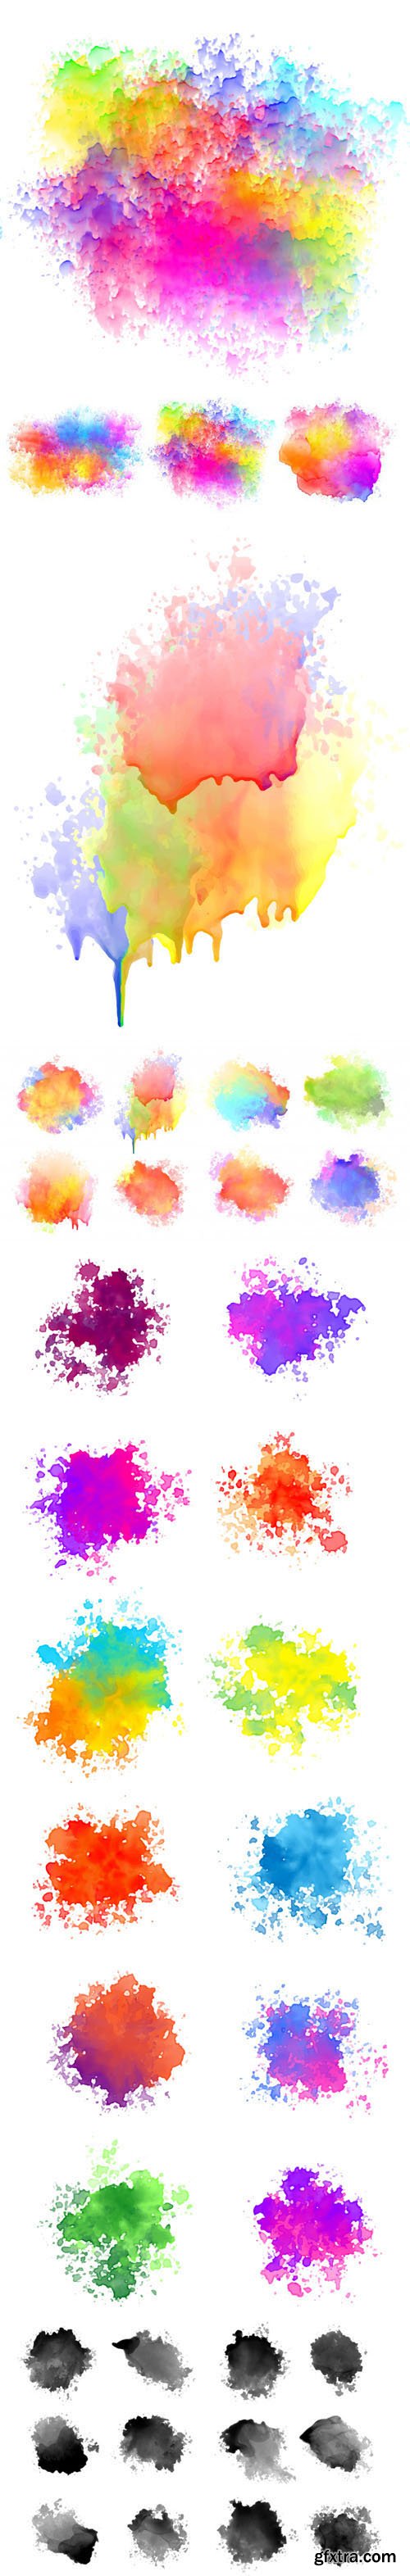 Collection Of Watercolor Splatter Vector Templates